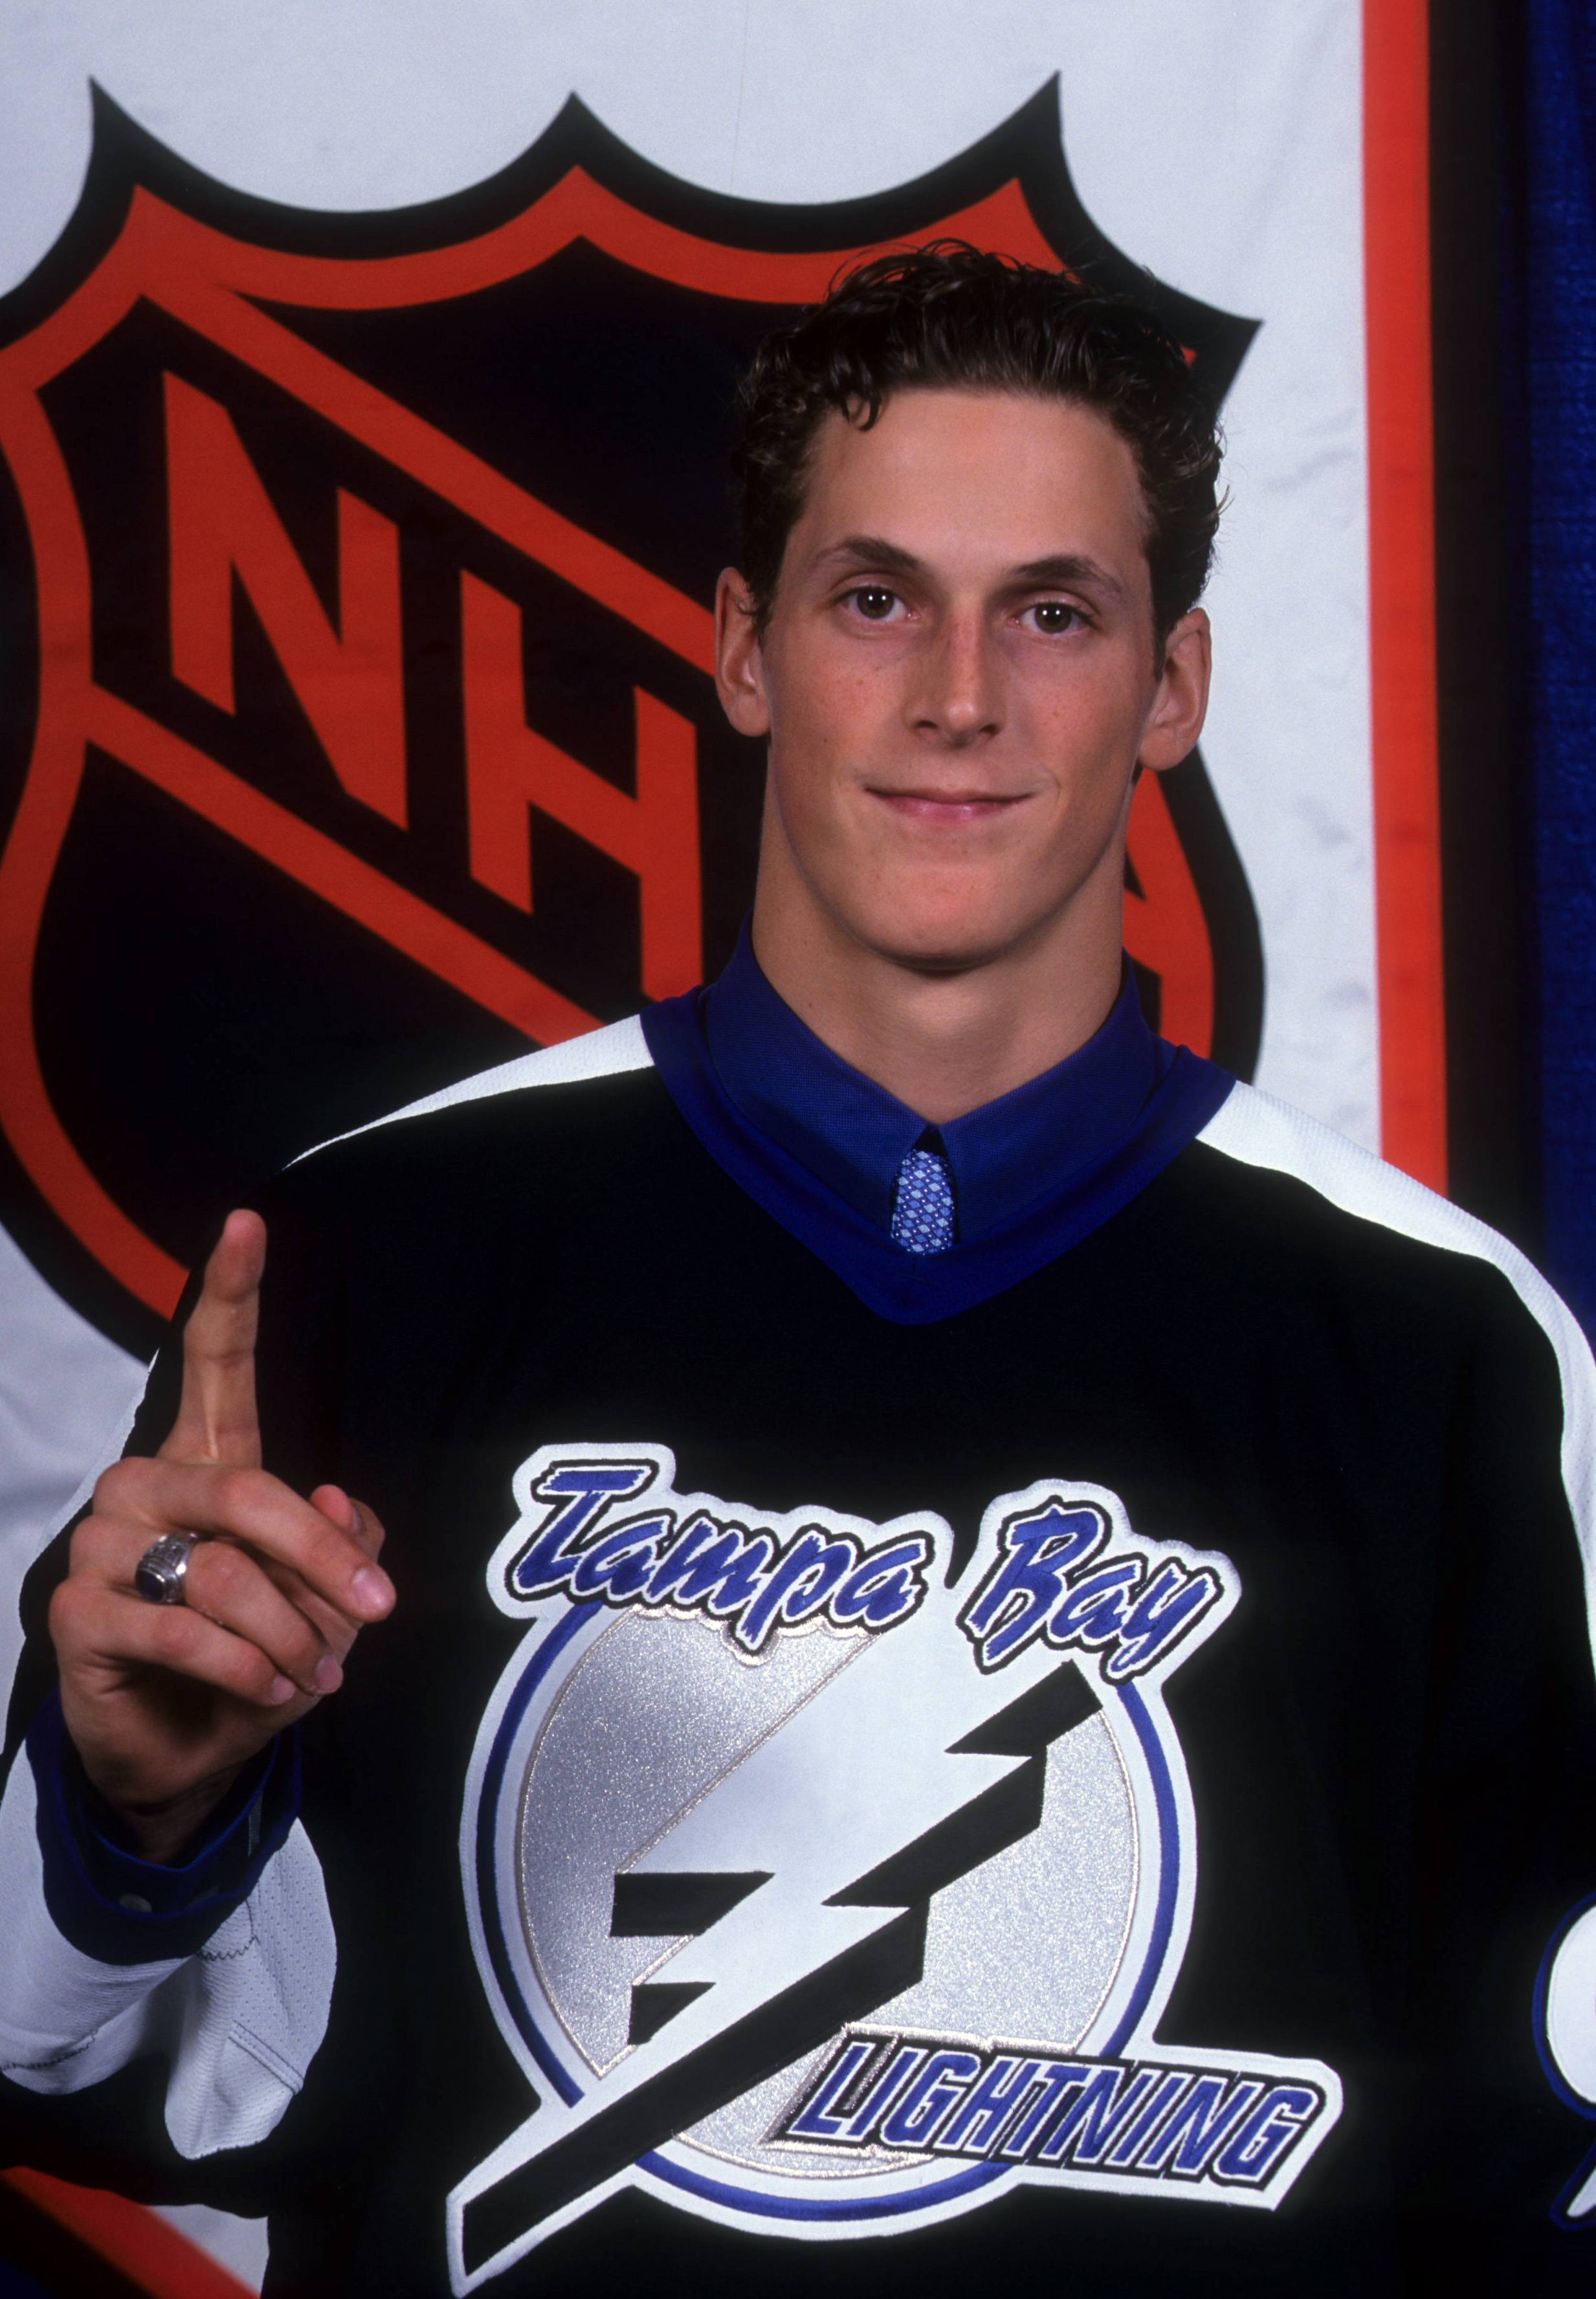 1998 NHL Draft: Vincent Lecavalier Taken First Overall 